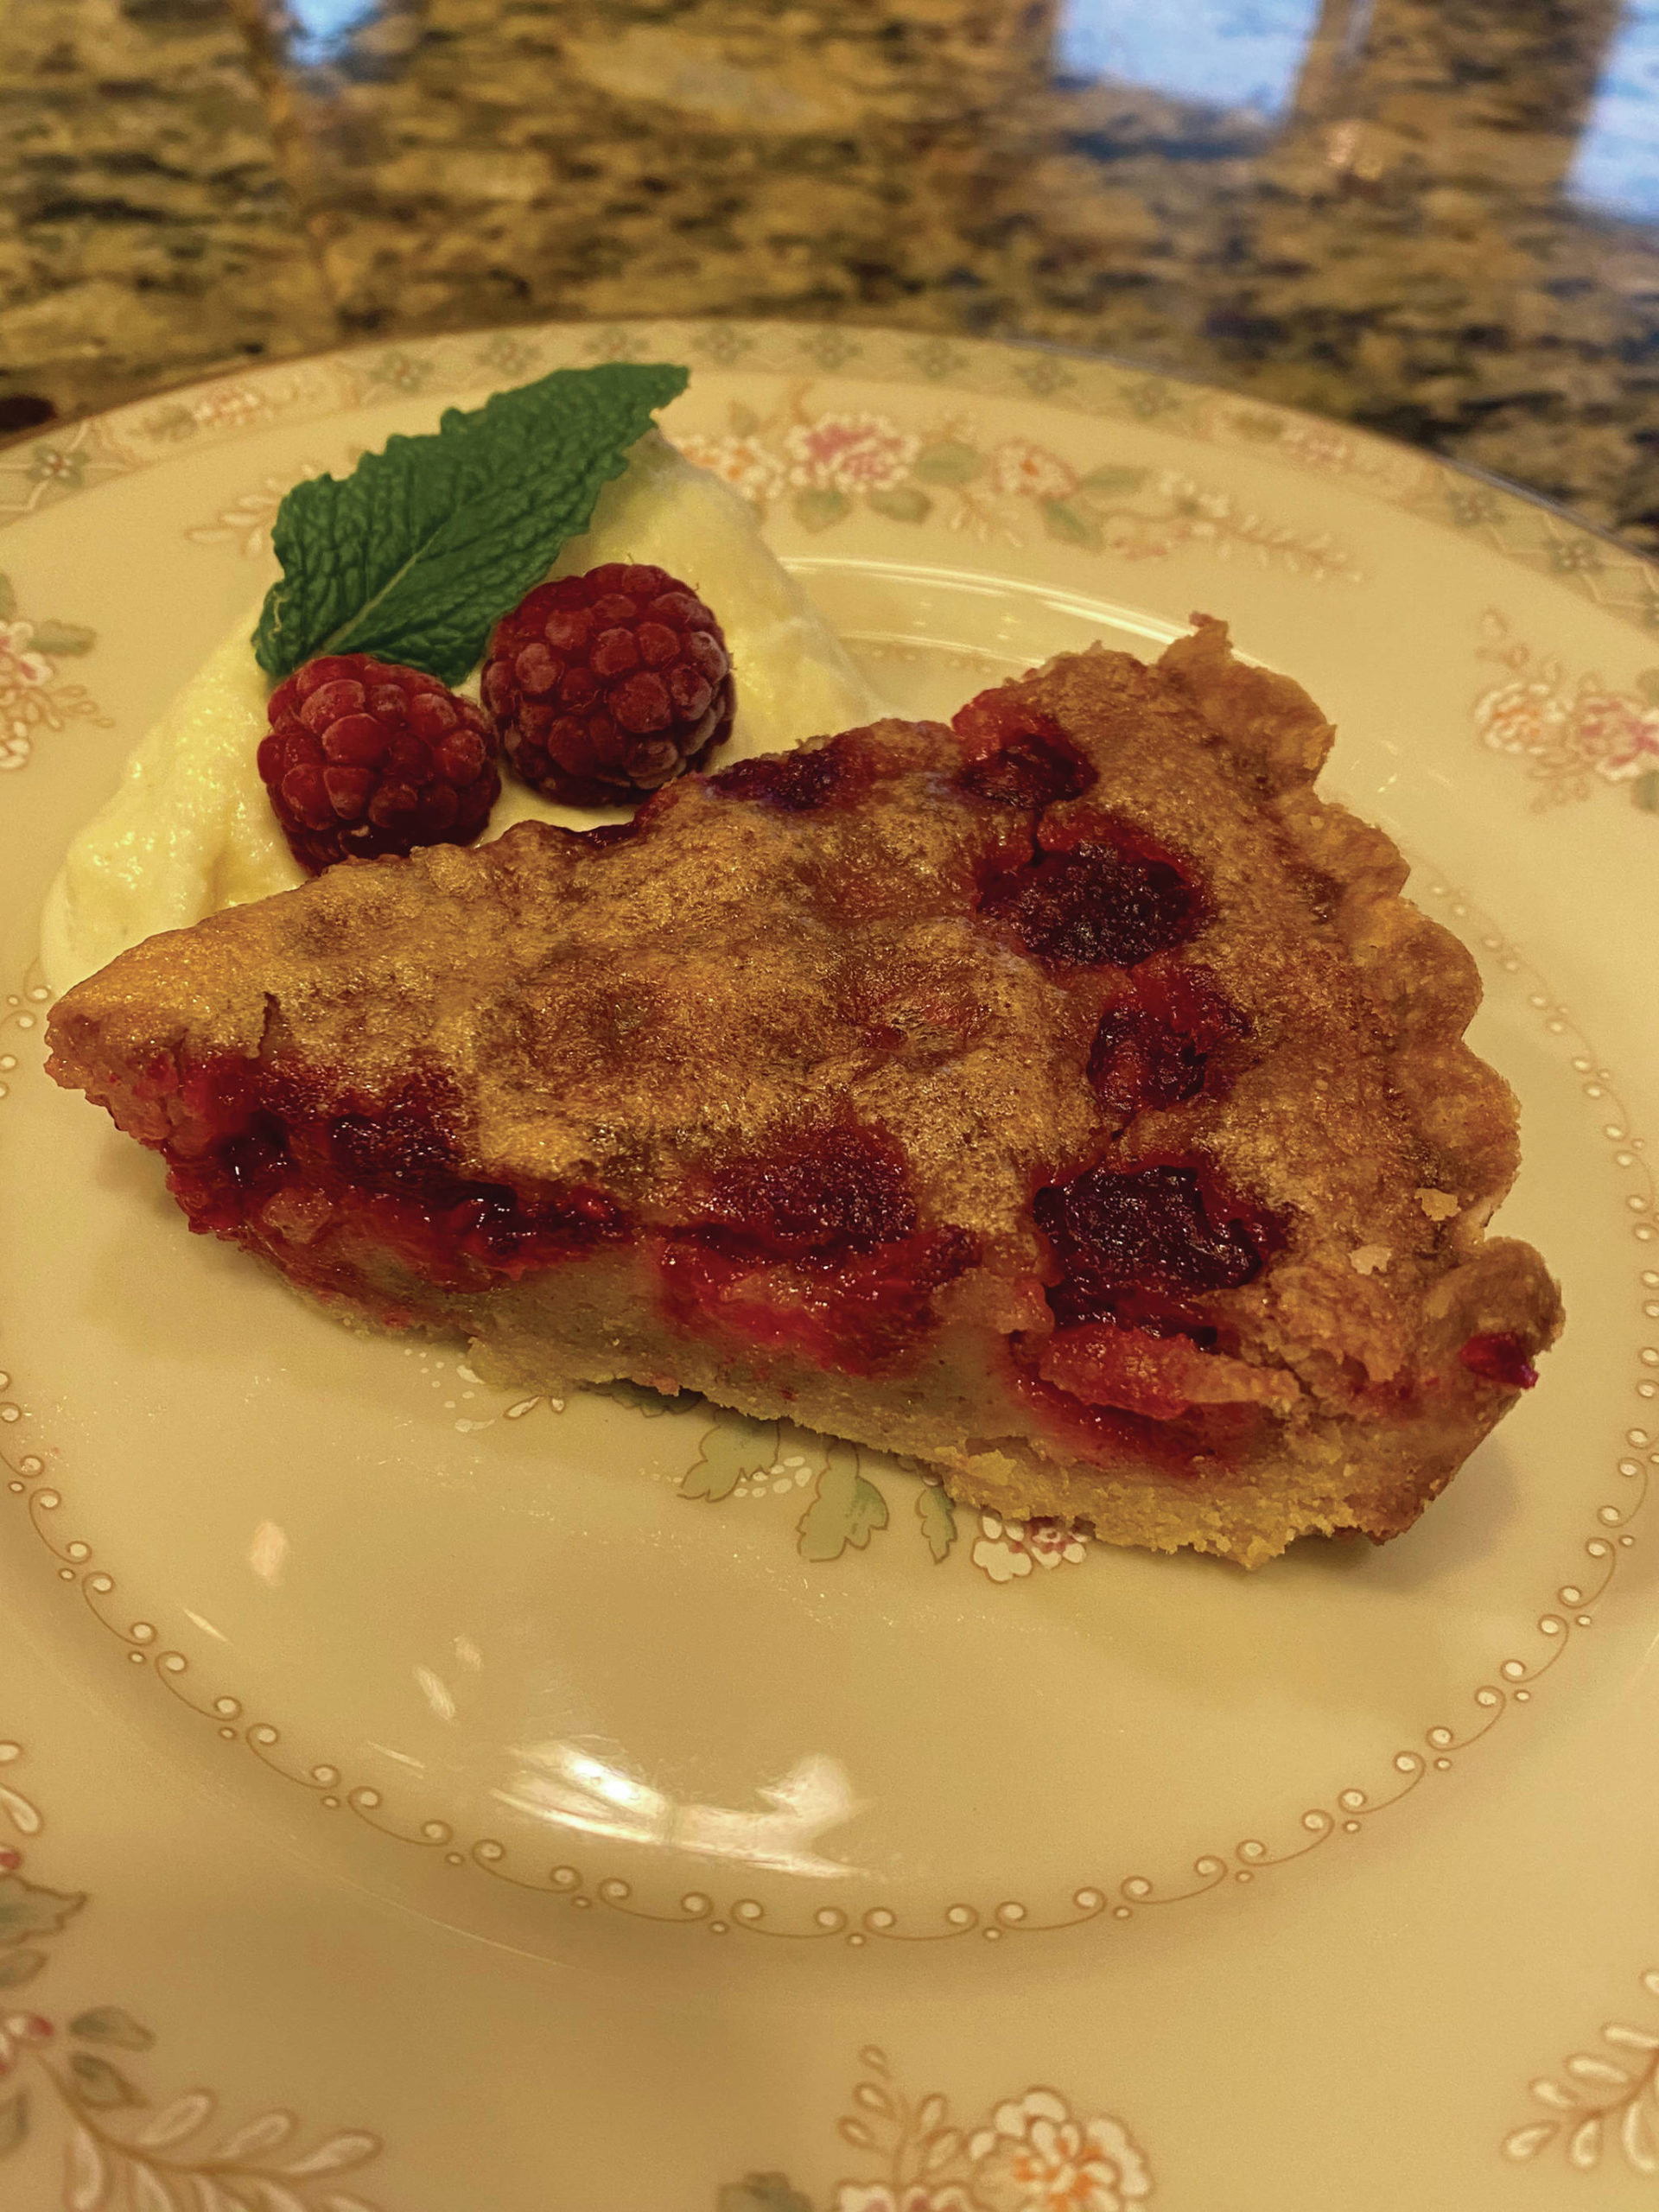 Fresh picked raspberries are an essential ingredient for a brown butter tart, as seen here in Teri Robl’s kitchen on Aug. 25, 2020, in Homer, Alaska. (Photo by Teri Robl)